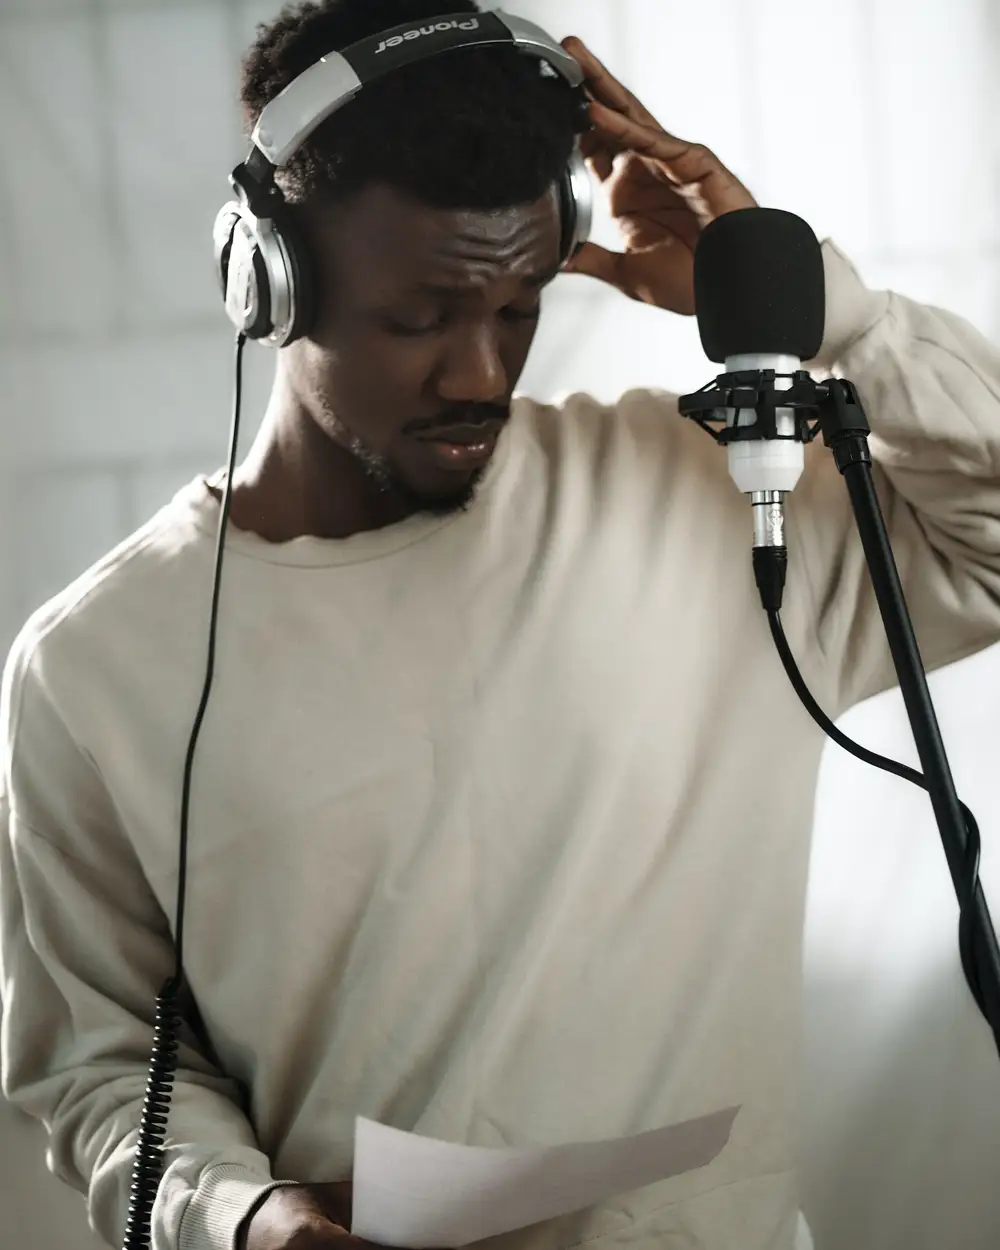 African male voice over artist recording a voice-over script with a condenser and Pioneer exclusive headphones.